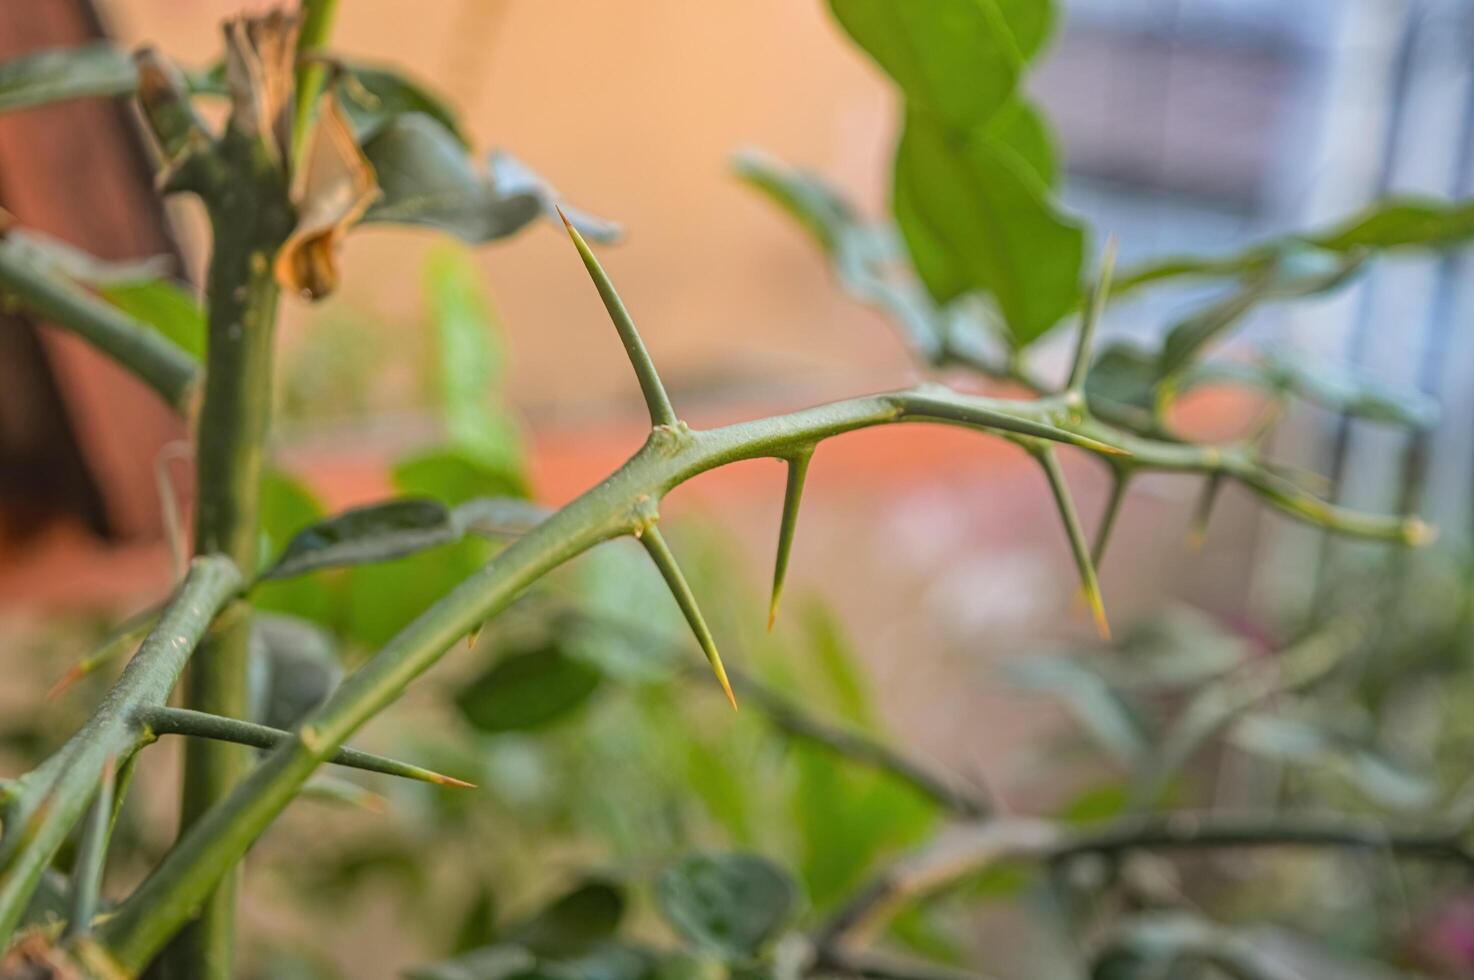 sharp thorns on the twigs of the kaffir lime plant or Citrus hystrix photo